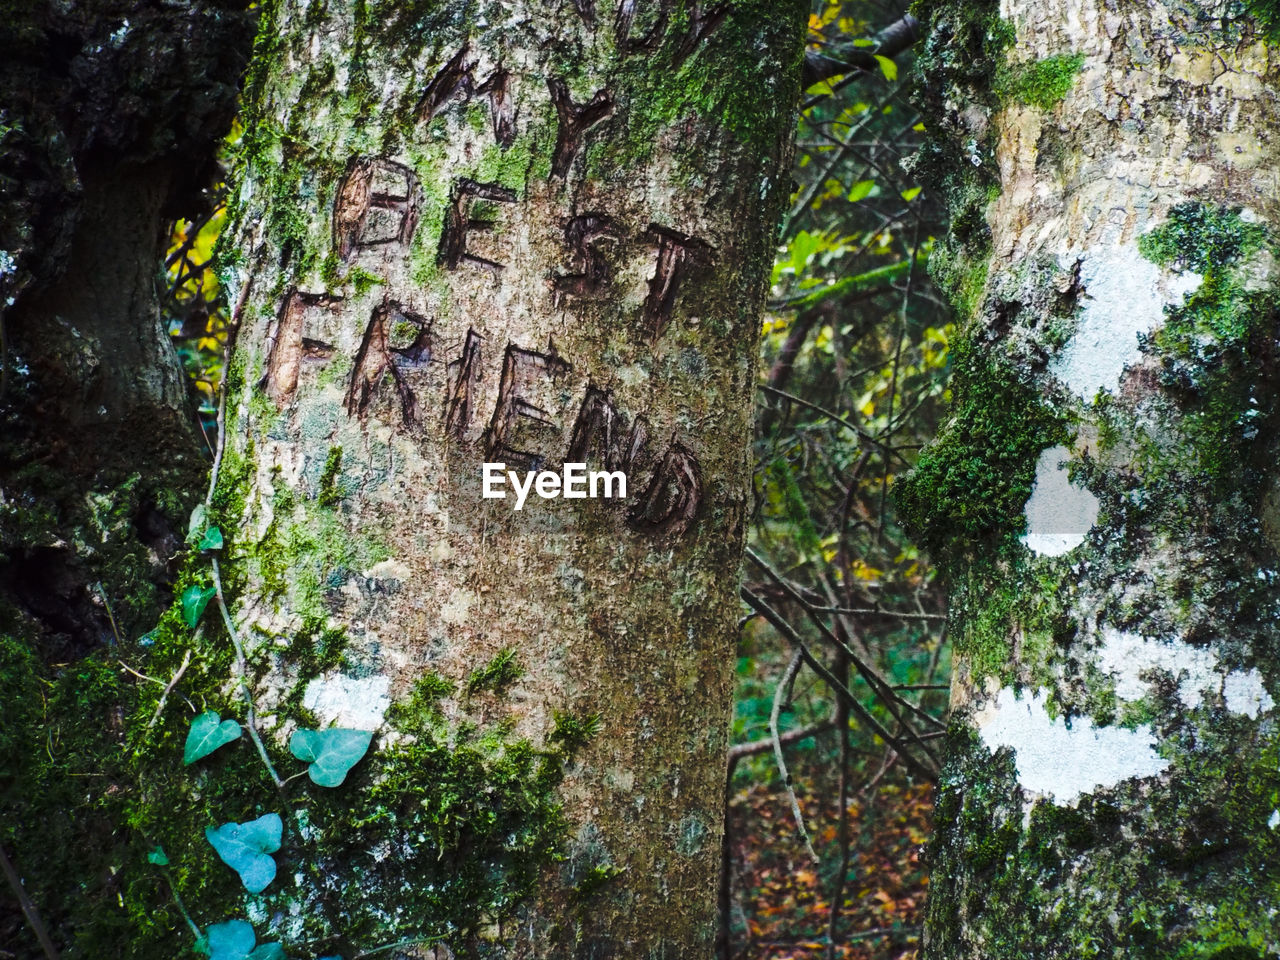 Text scribbled on tree trunk in forest